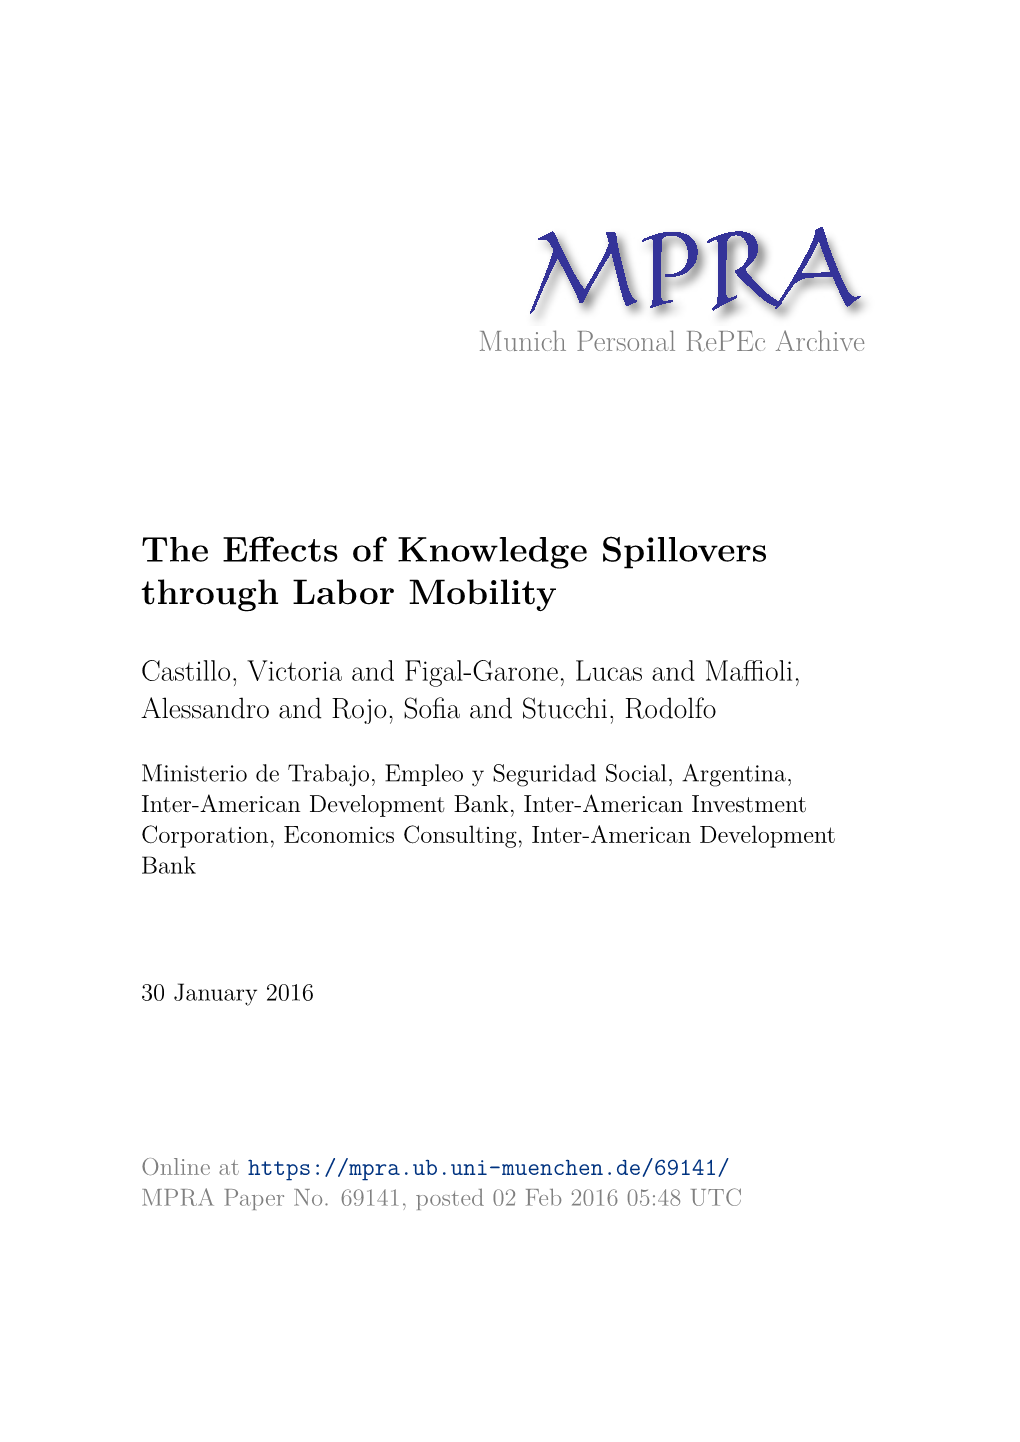 The Effects of Knowledge Spillovers Through Labor Mobility